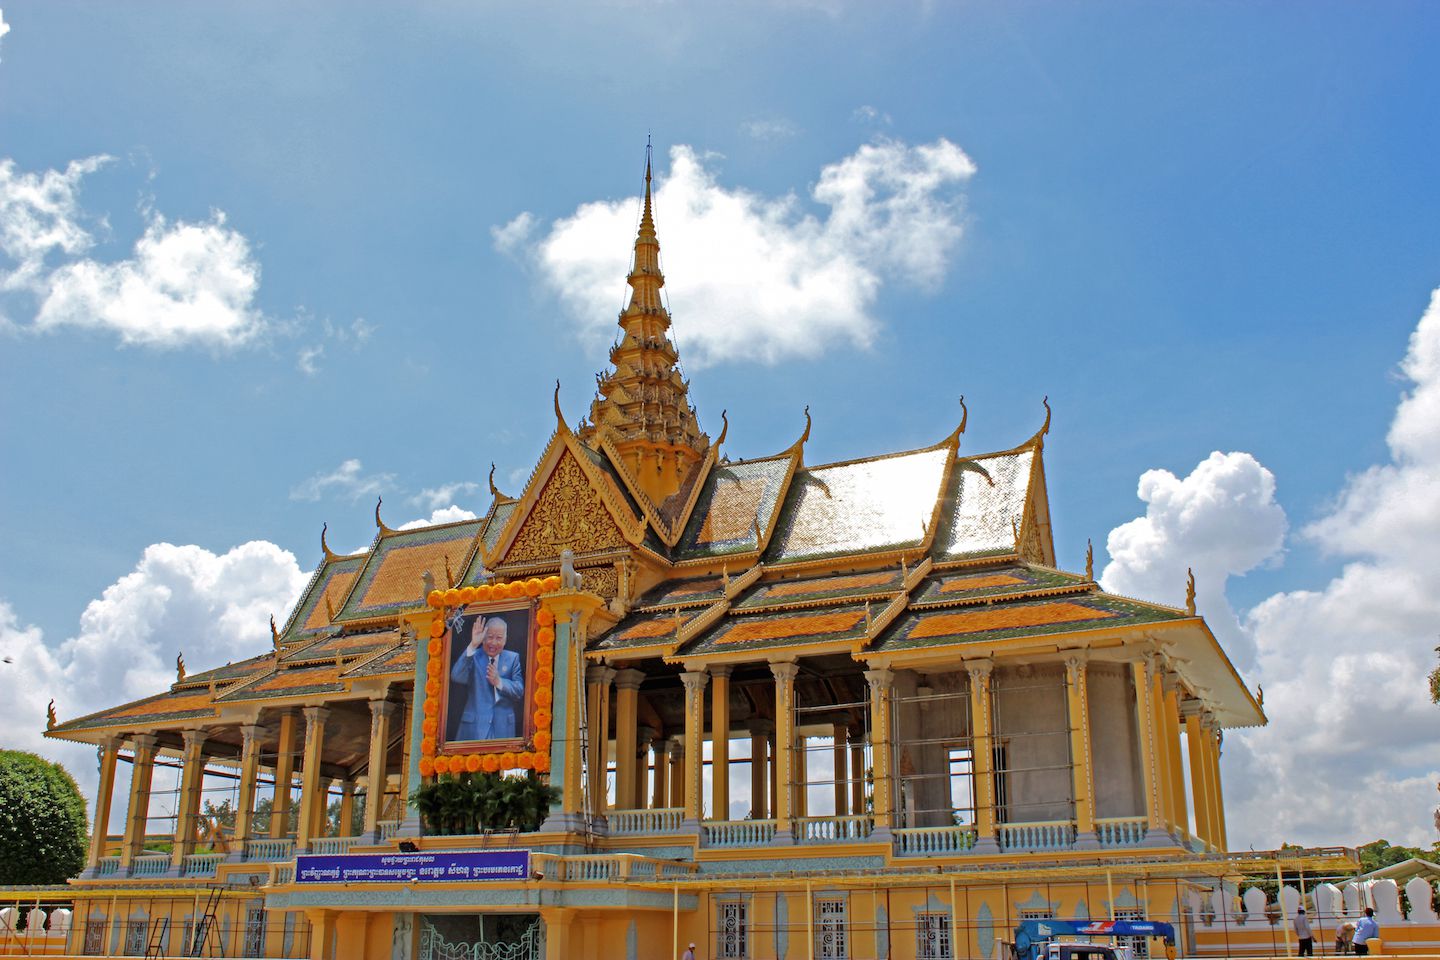 Victory Gate at the Royal Palace in Phnom Penh